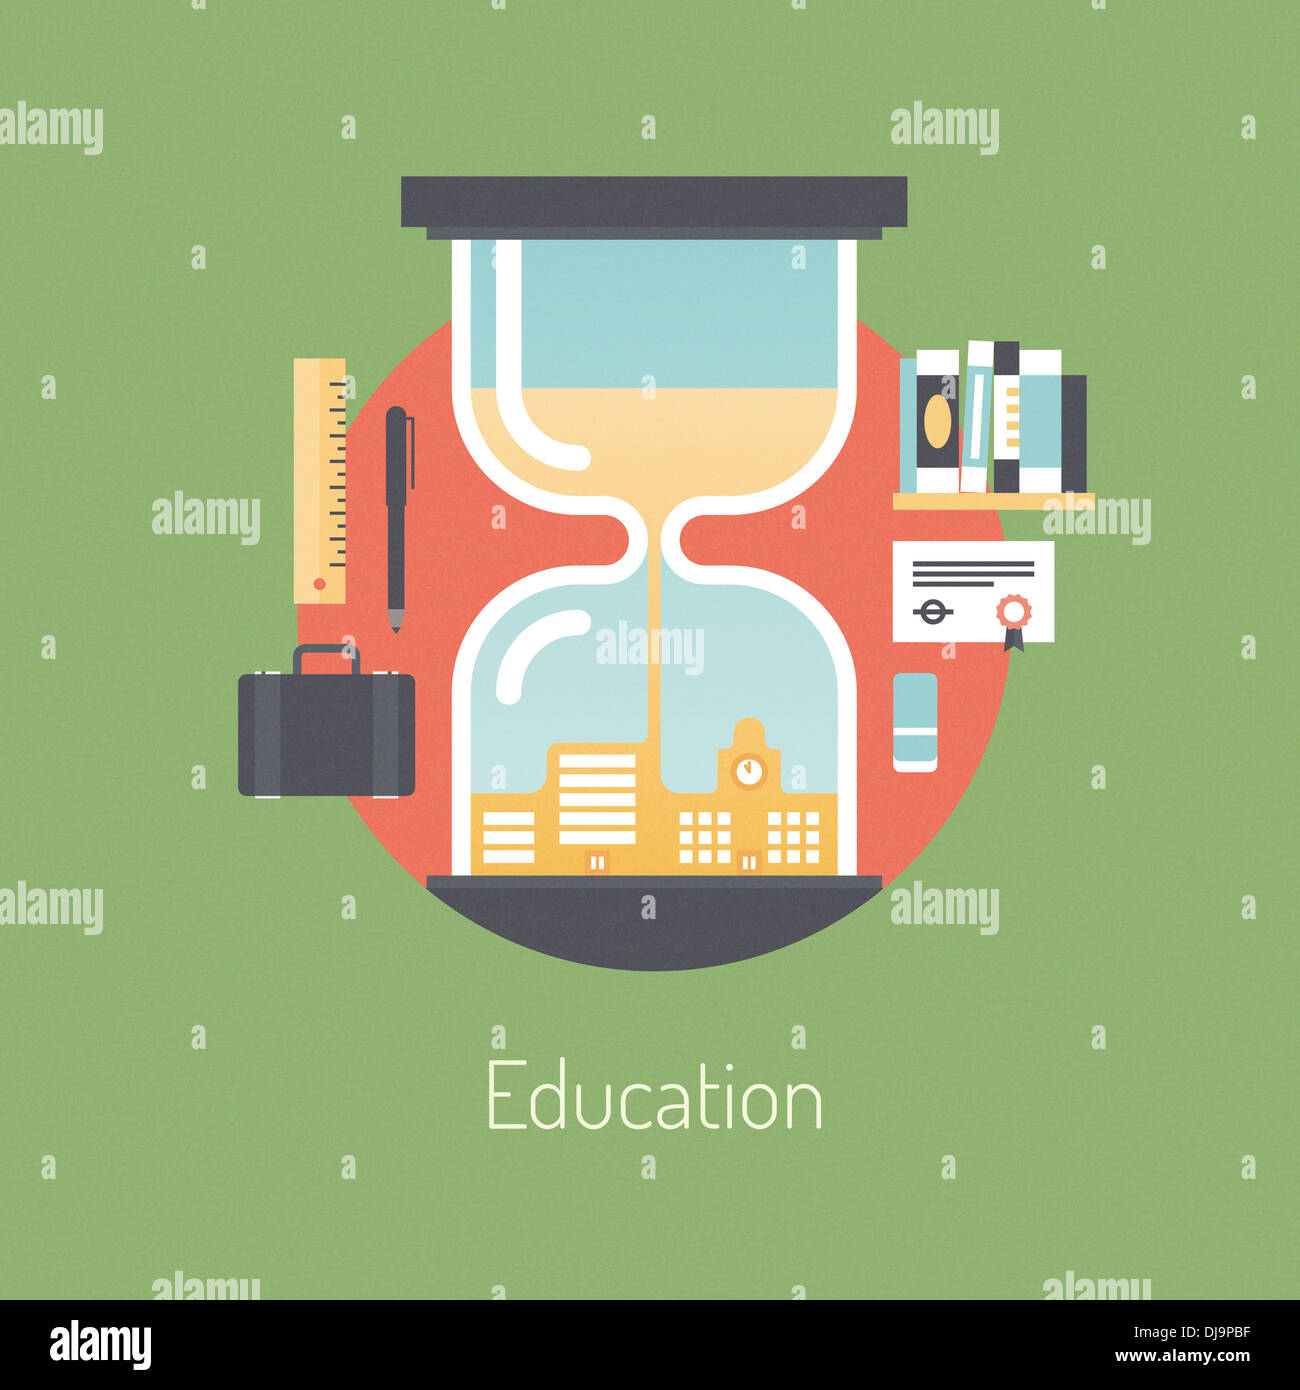 Flat design illustration poster concept of education experience and learning new knowledge with school and business objects Stock Photo